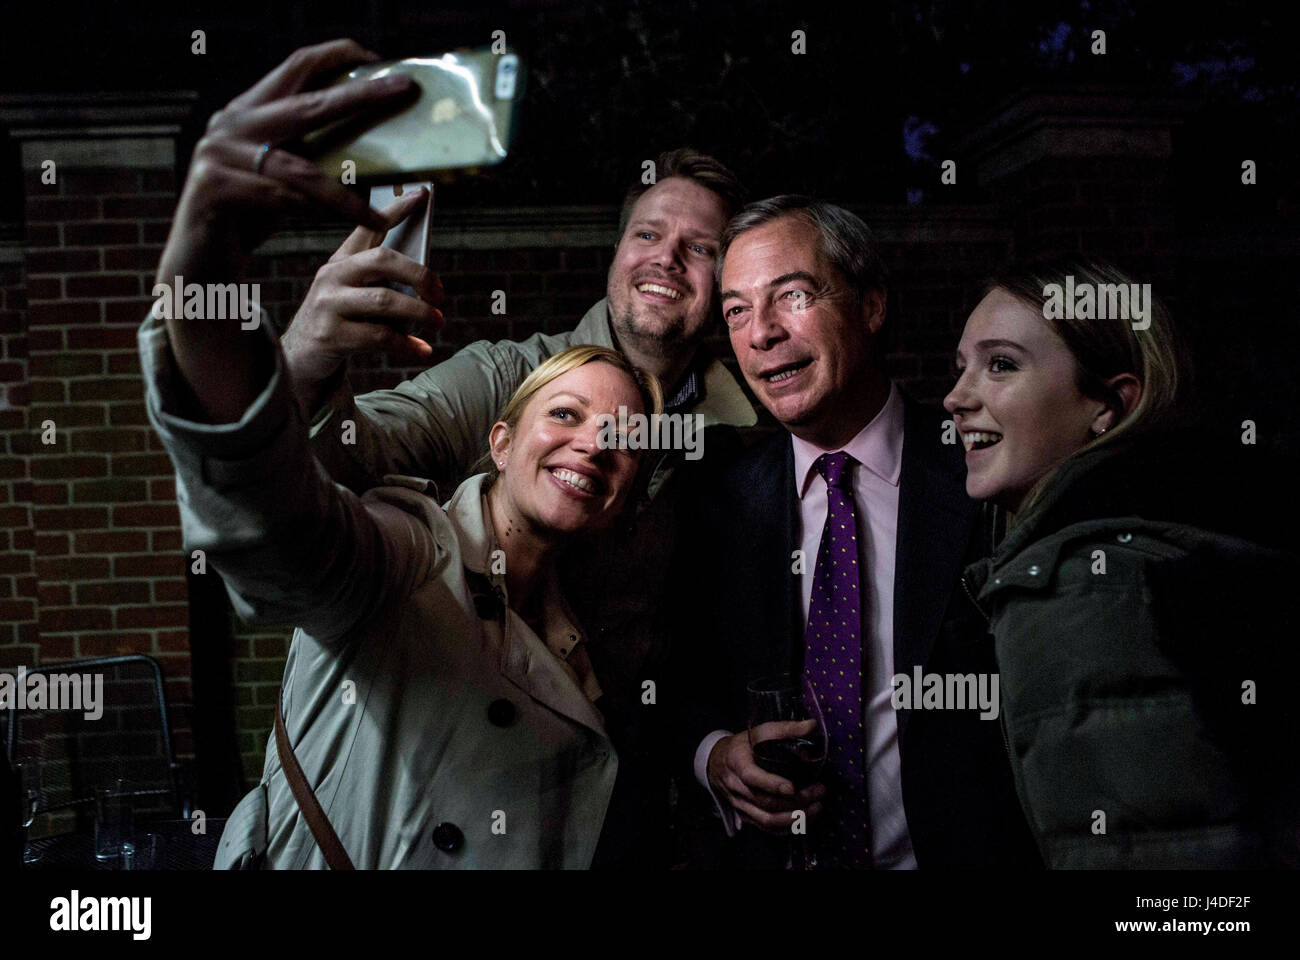 Former Ukip leader Nigel Farage takes a selfie with supporters at the launch of Bill Etheridge's new book, Putting great back into Britain. Stock Photo